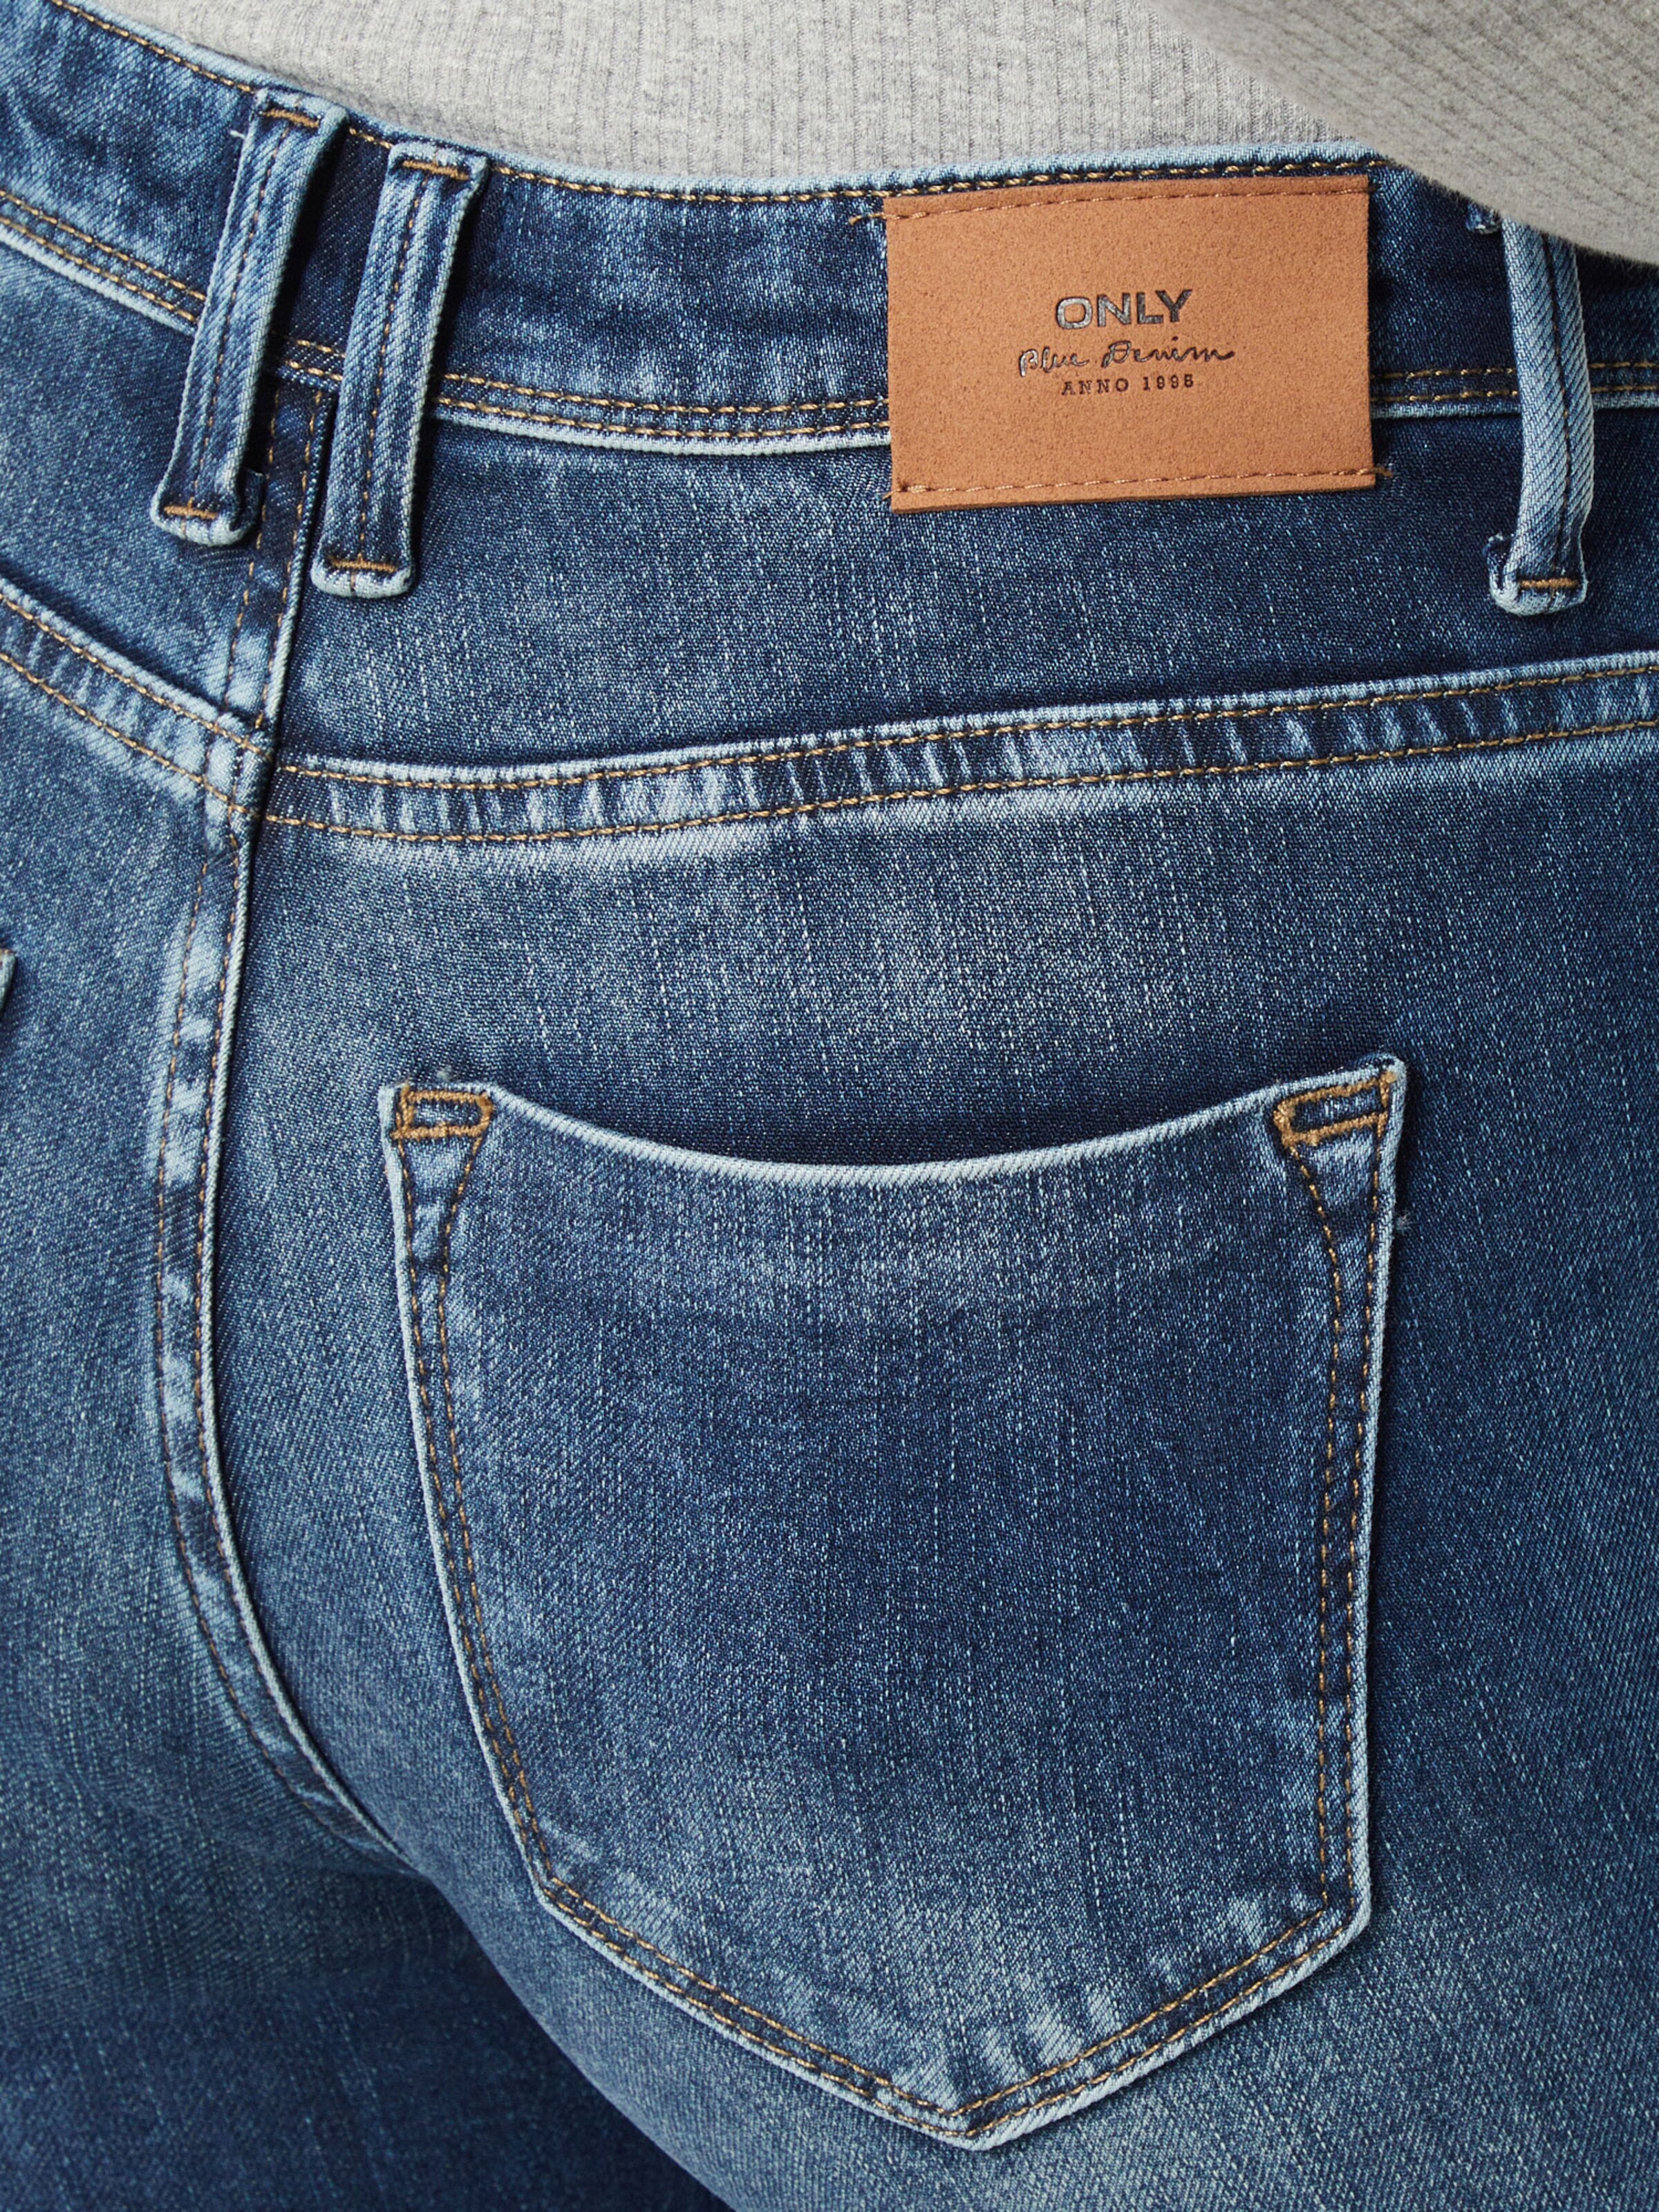 efWIH Jeans ONLY Jeans in Blu 